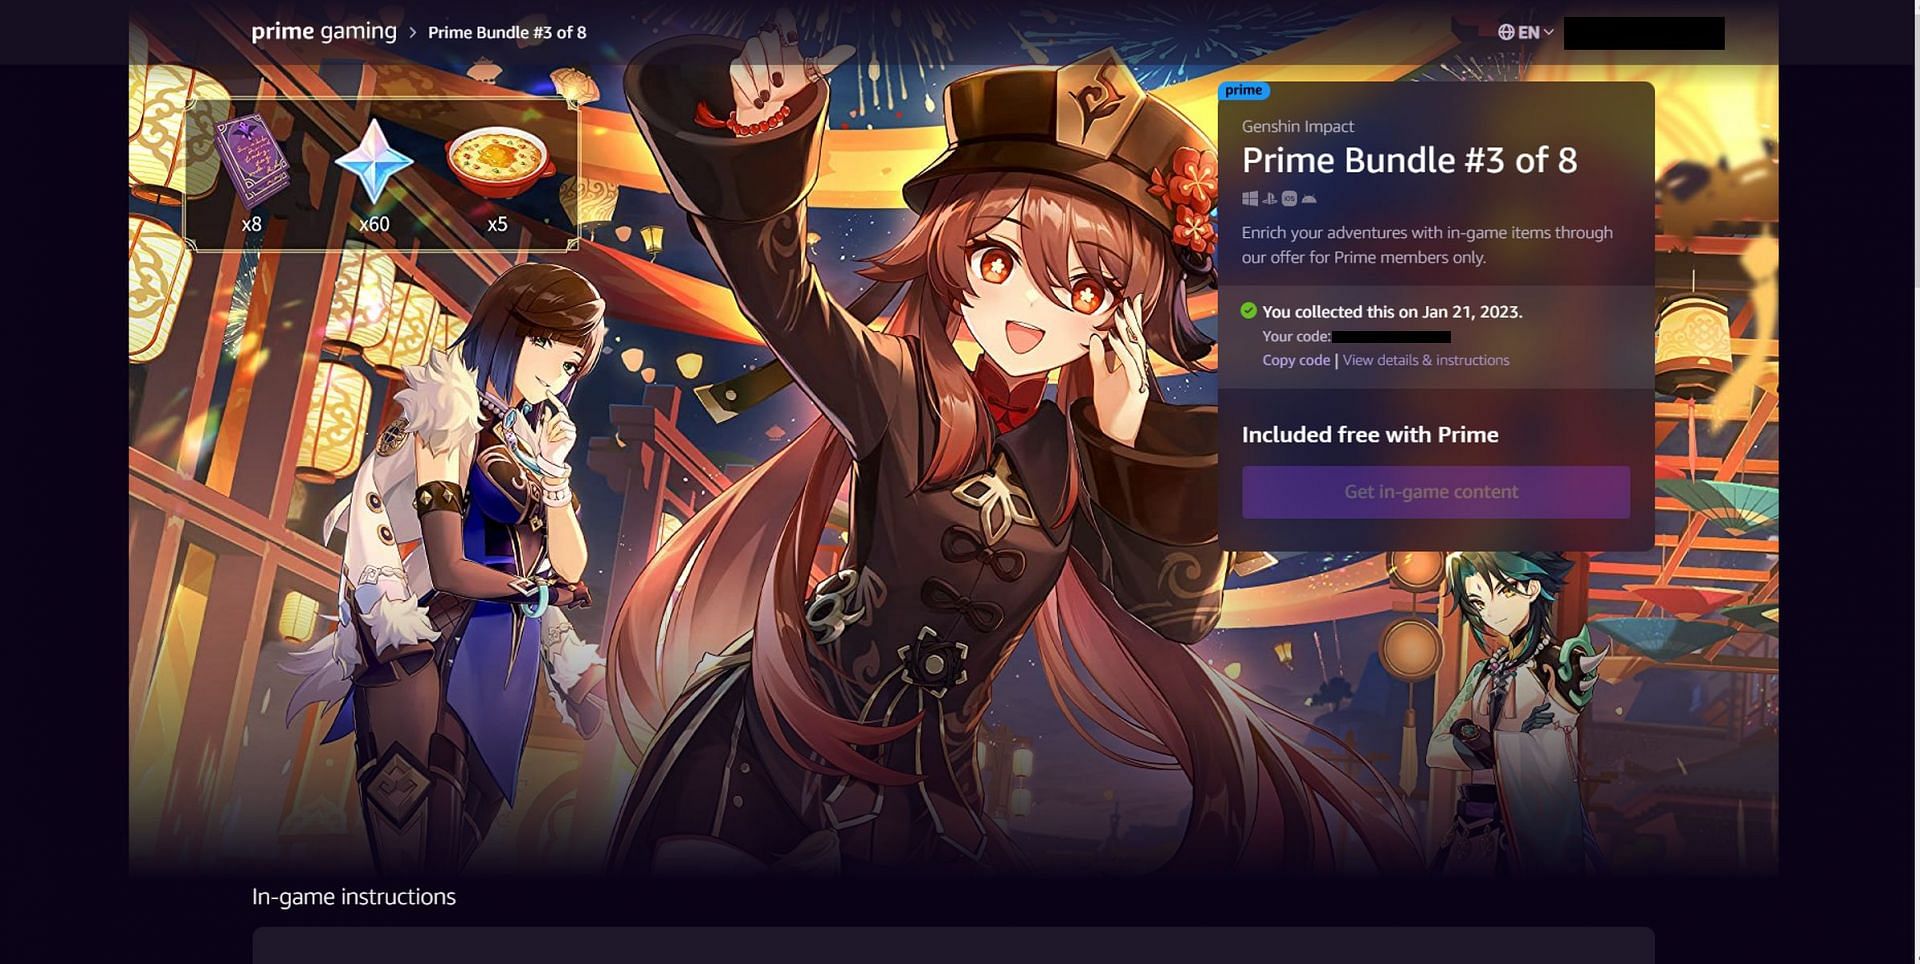 This is the web page for the 3rd bundle (Image courtesy of Prime Gaming, HoYoverse)